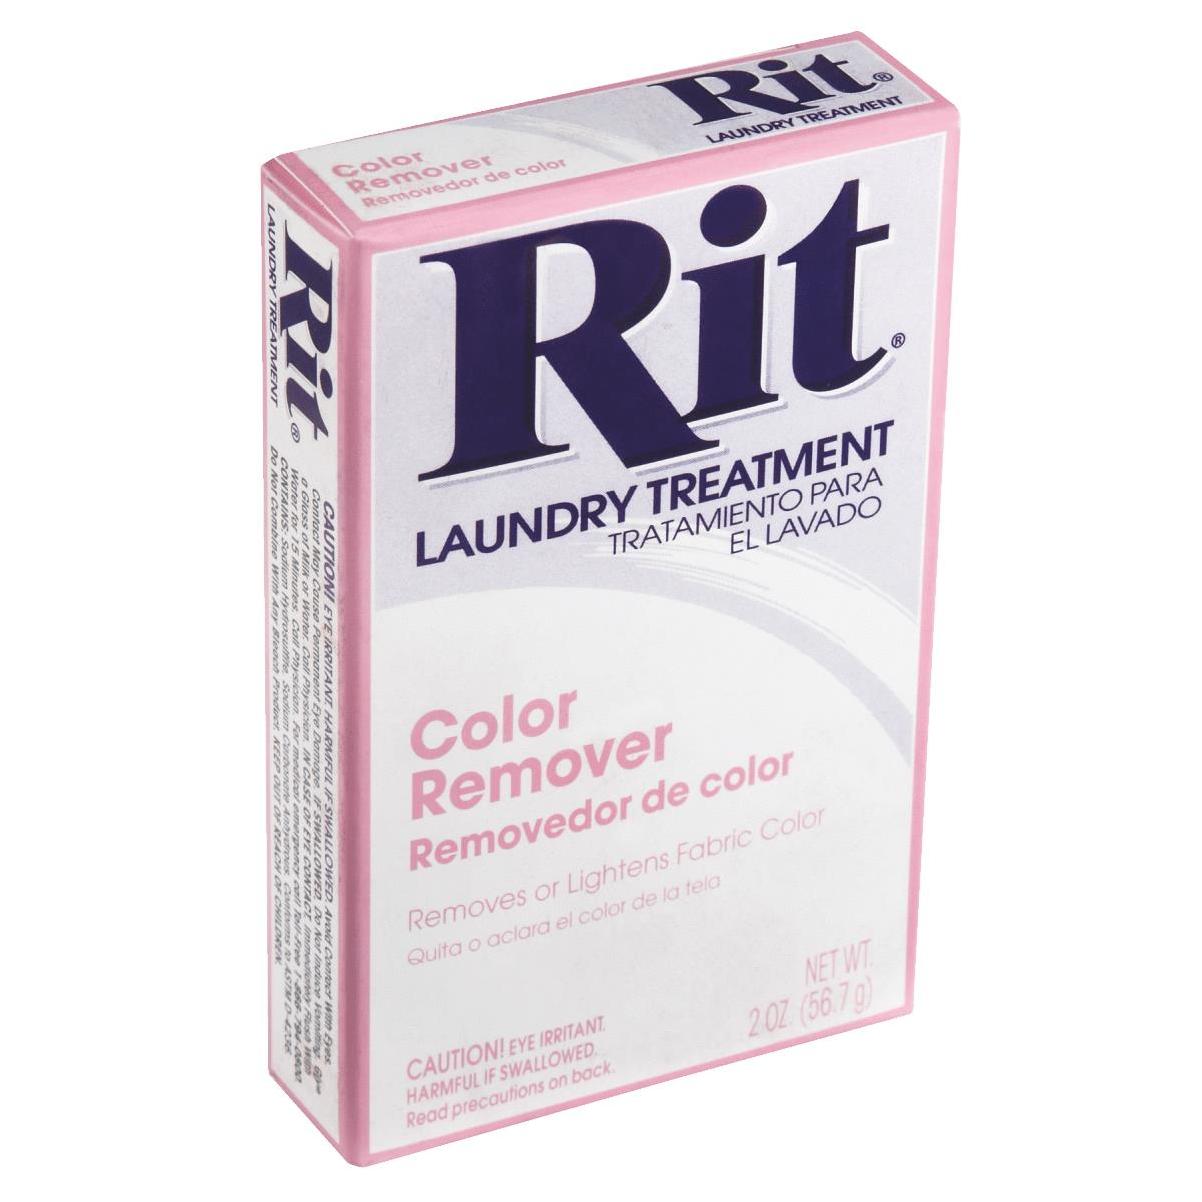 How To Remove Dye From Fabric, Rit Color Remover